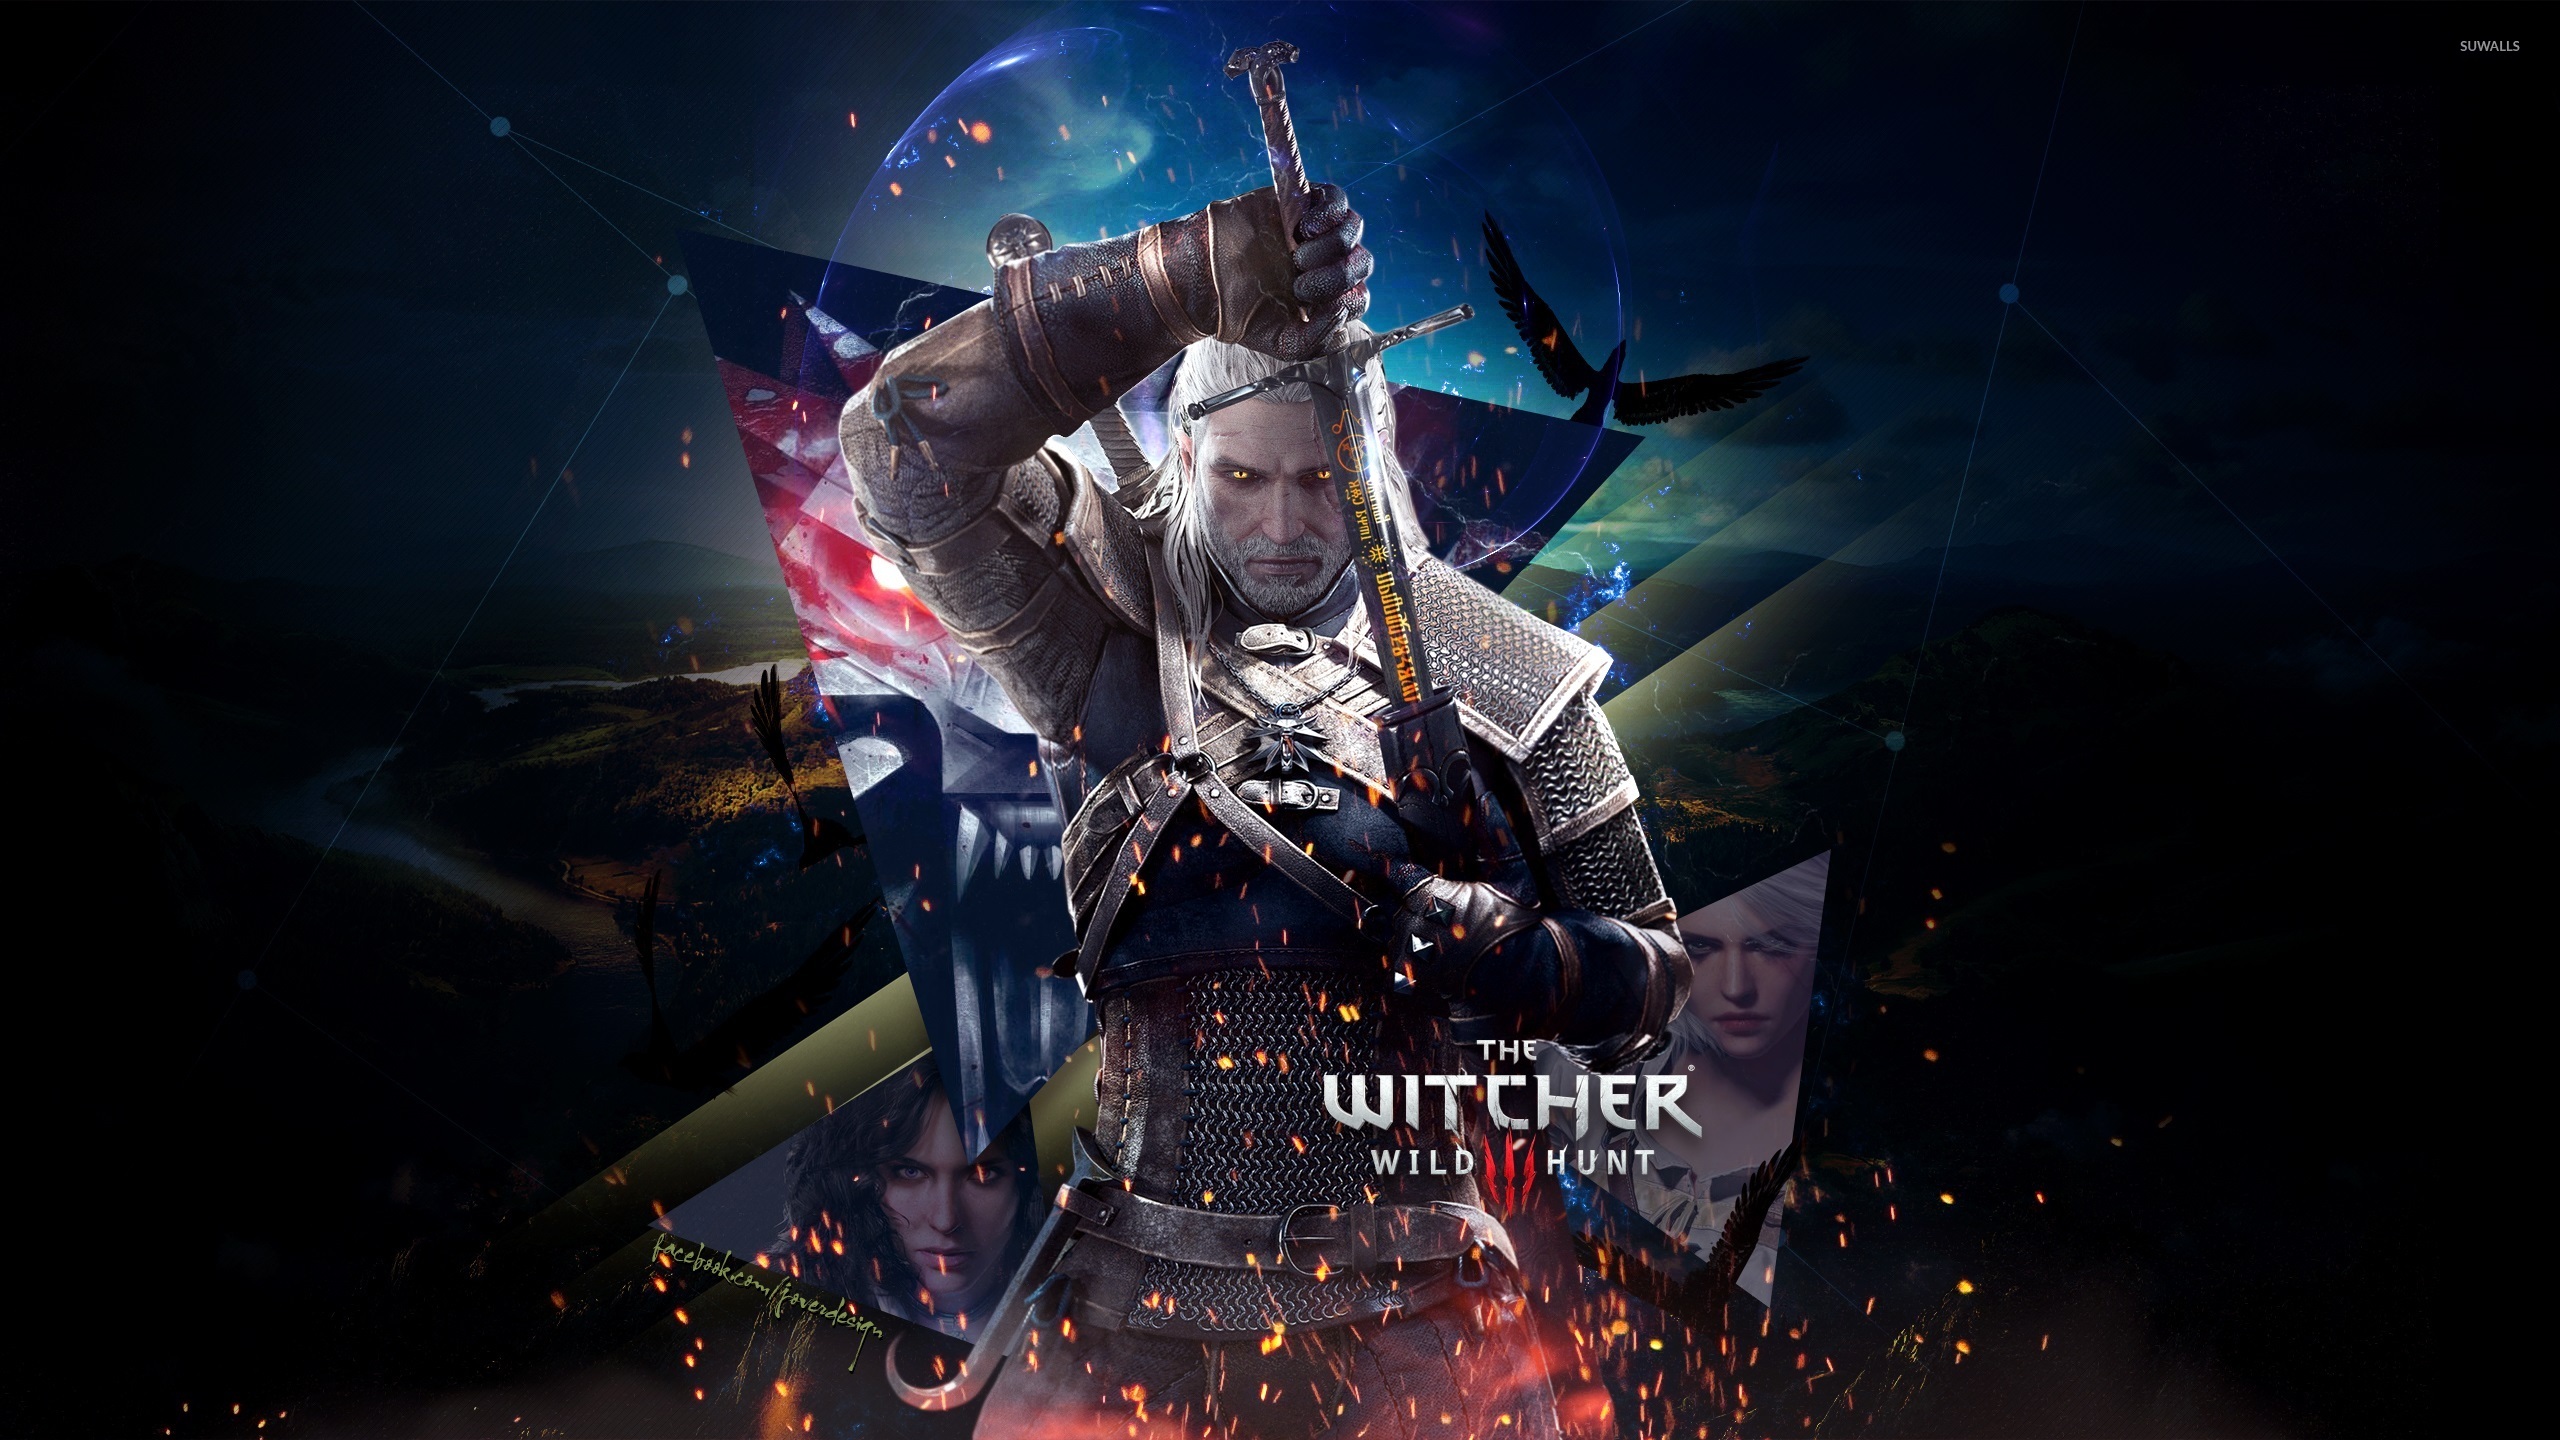 The Witcher 3 Wild Hunt wallpaper   Game wallpapers   35542 2560x1440